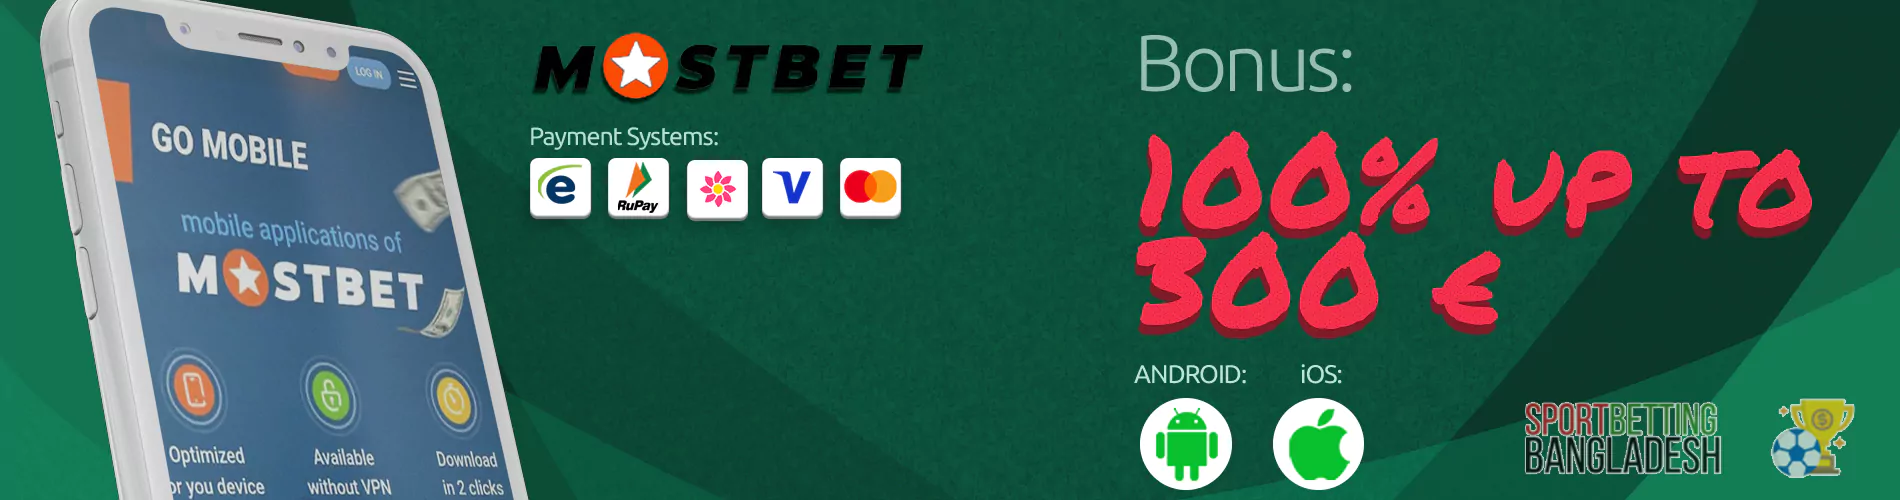 Mostbet Bangladesh app: payment systems, available platforms, welcome bonus.